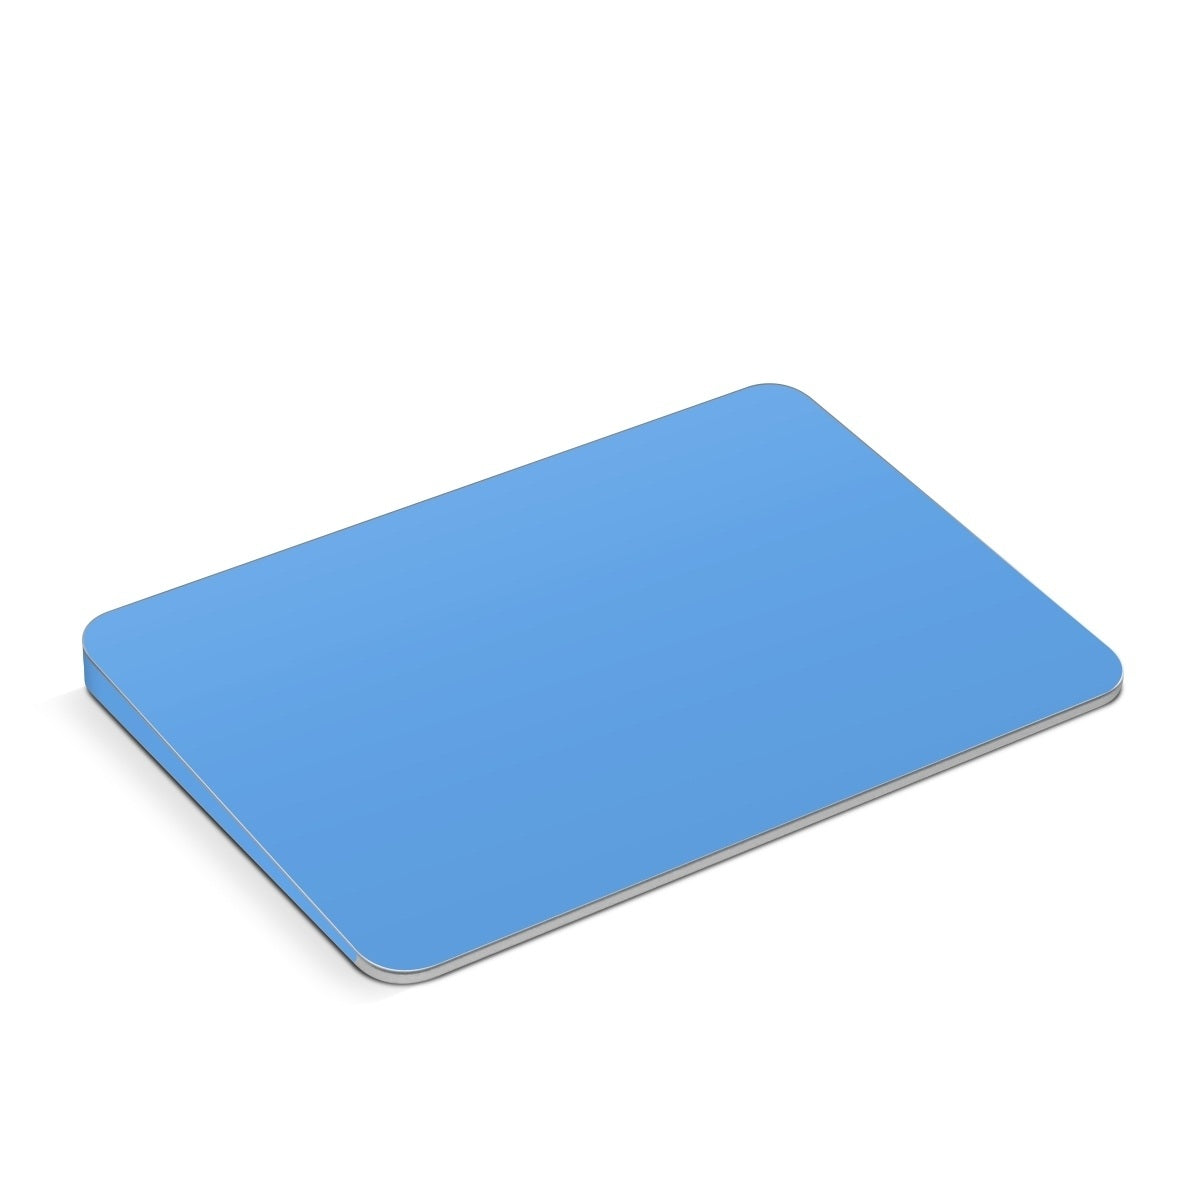 Solid State Blue - Apple Magic Trackpad Skin